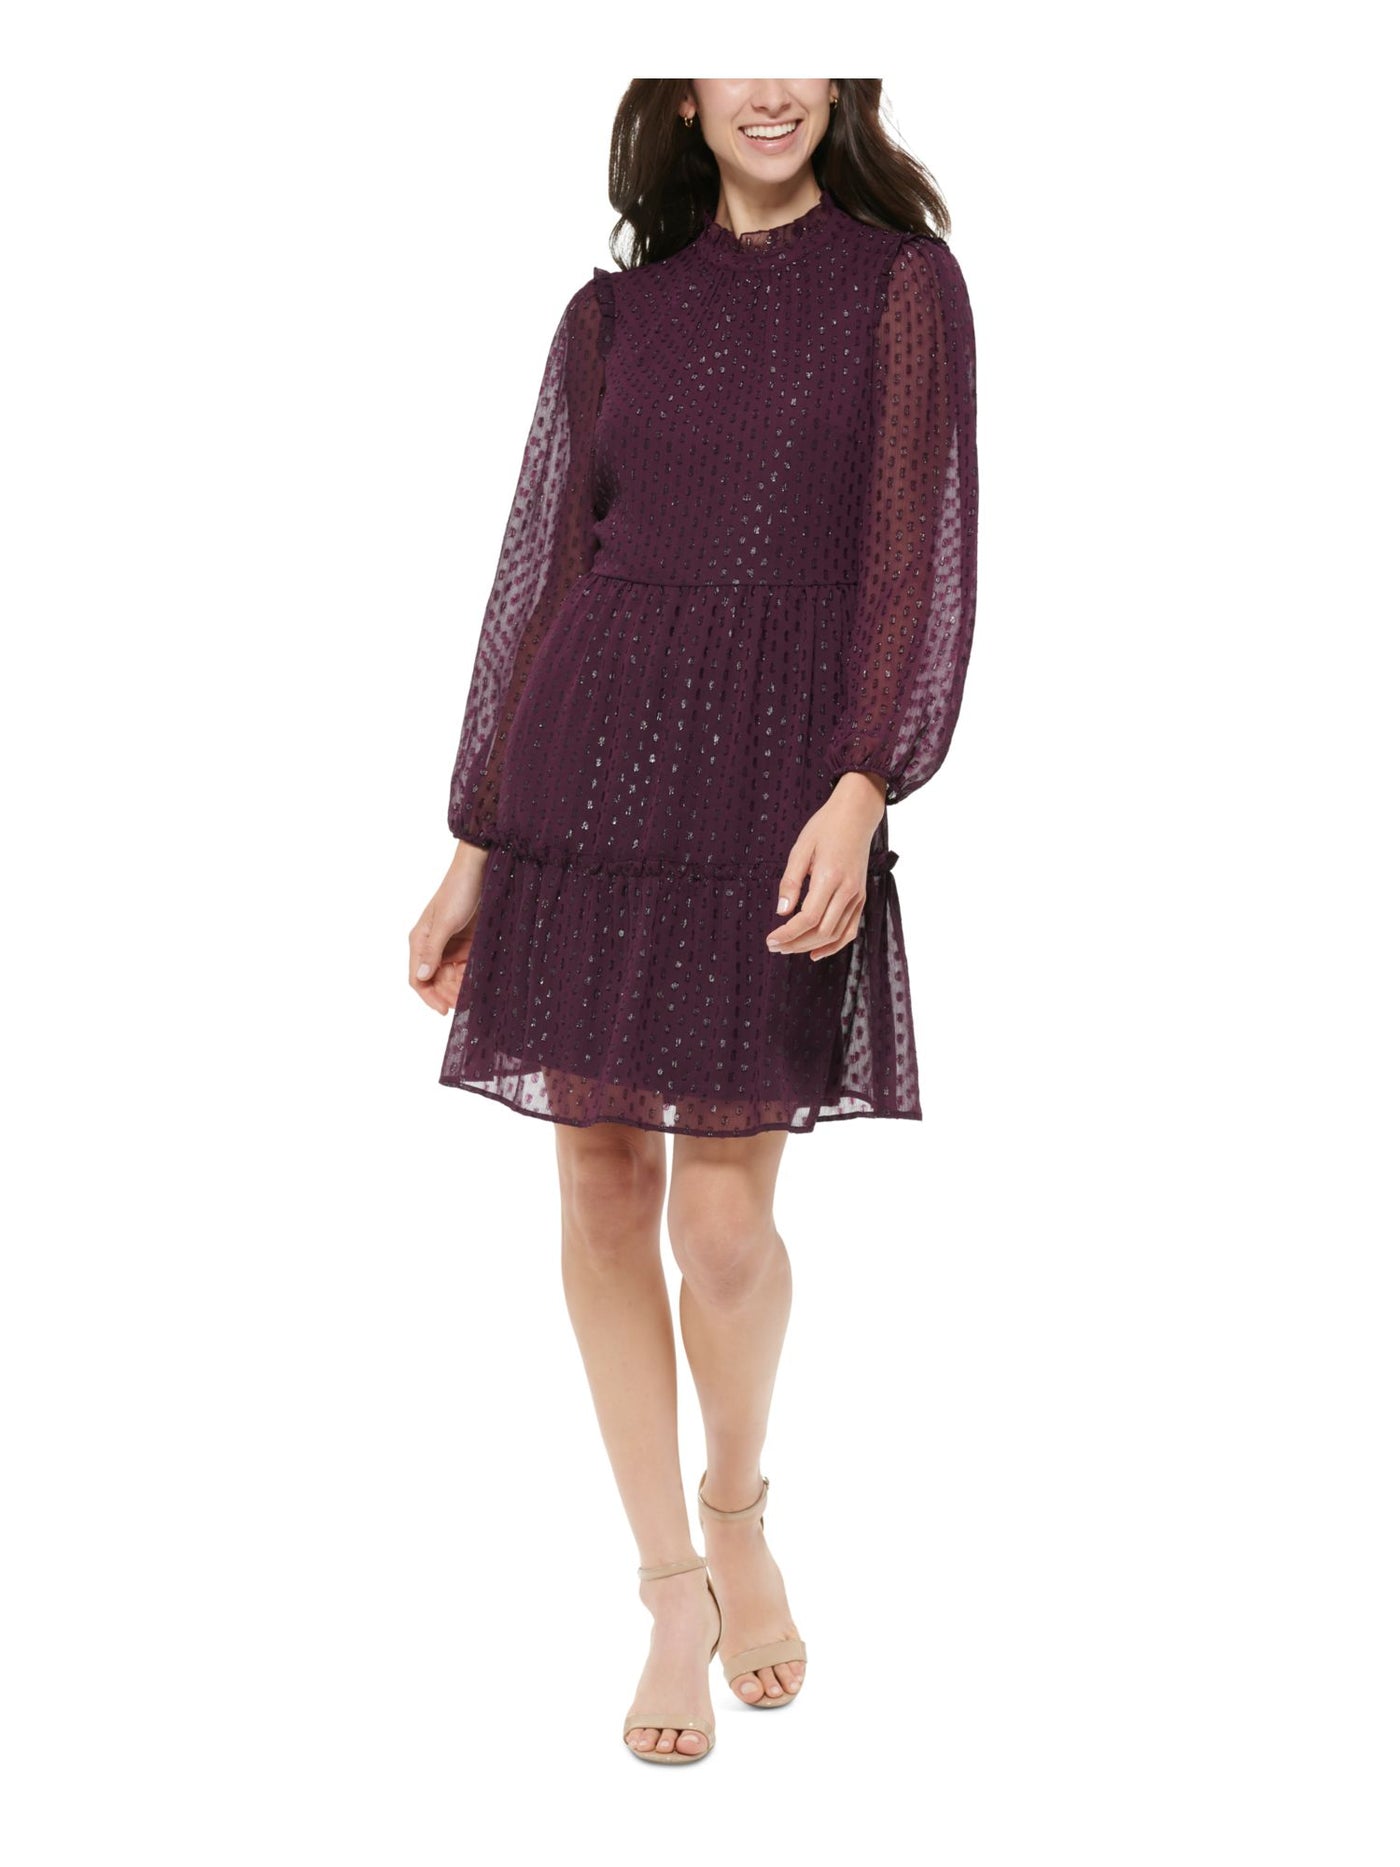 TOMMY HILFIGER Womens Purple Ruffled Long Sleeve Mock Neck Above The Knee Cocktail Shift Dress 12